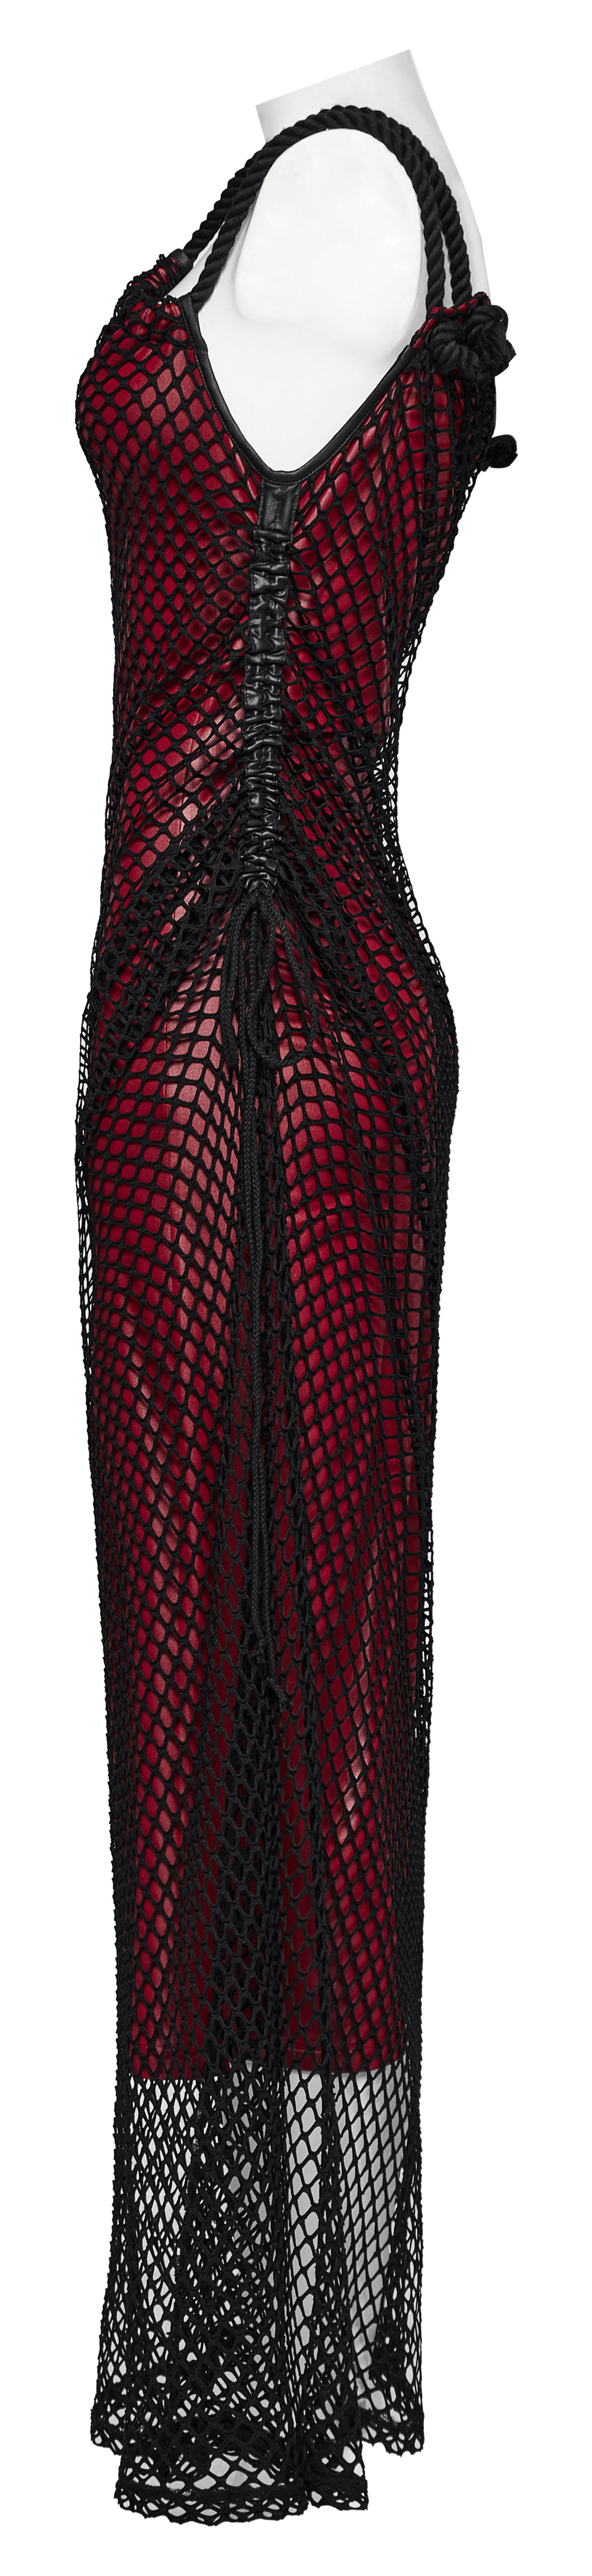 Edgy Goth Asymmetric Dress with Mesh and Shoulder Straps